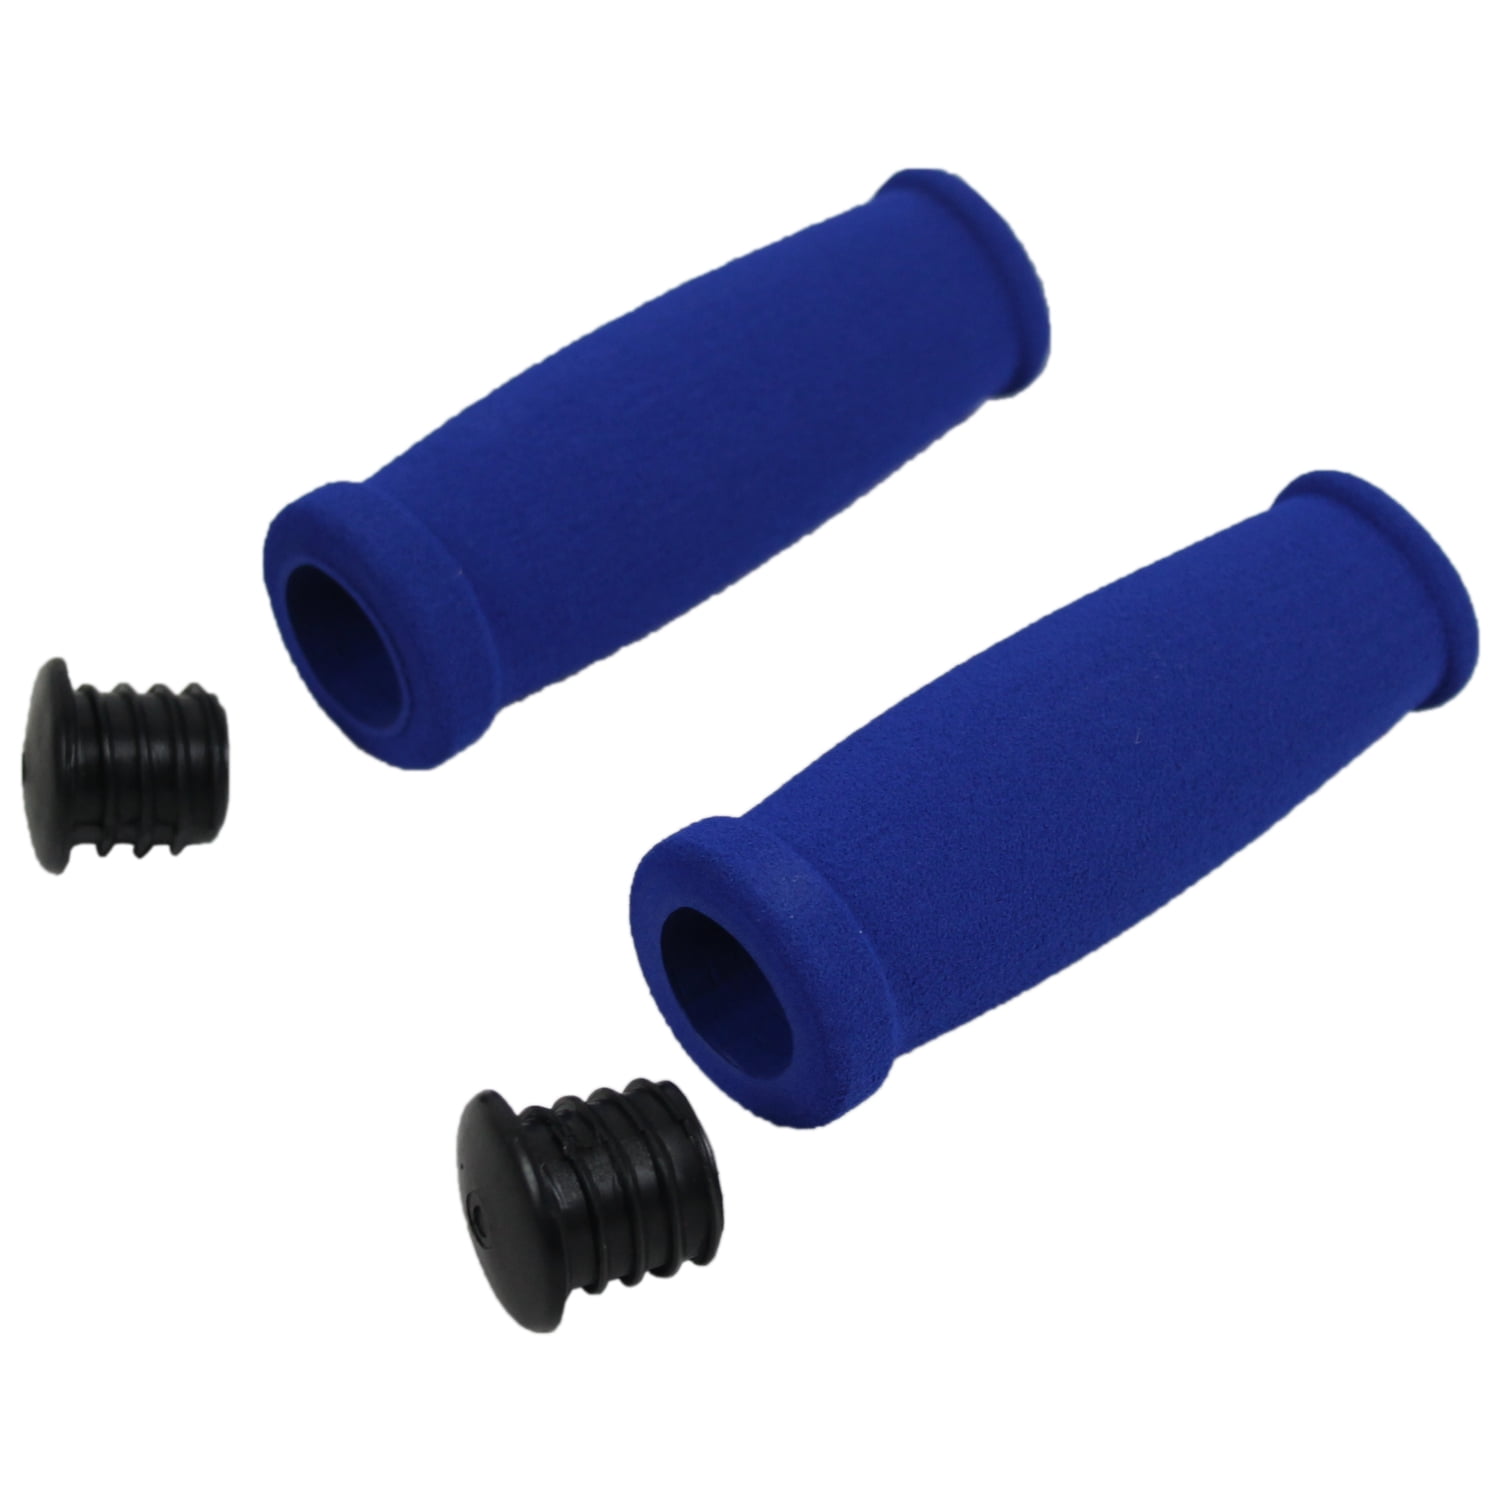 Sports Handle Bar Foam Grips for Bikes/Razors/Scooters Blue Assorted Colors 